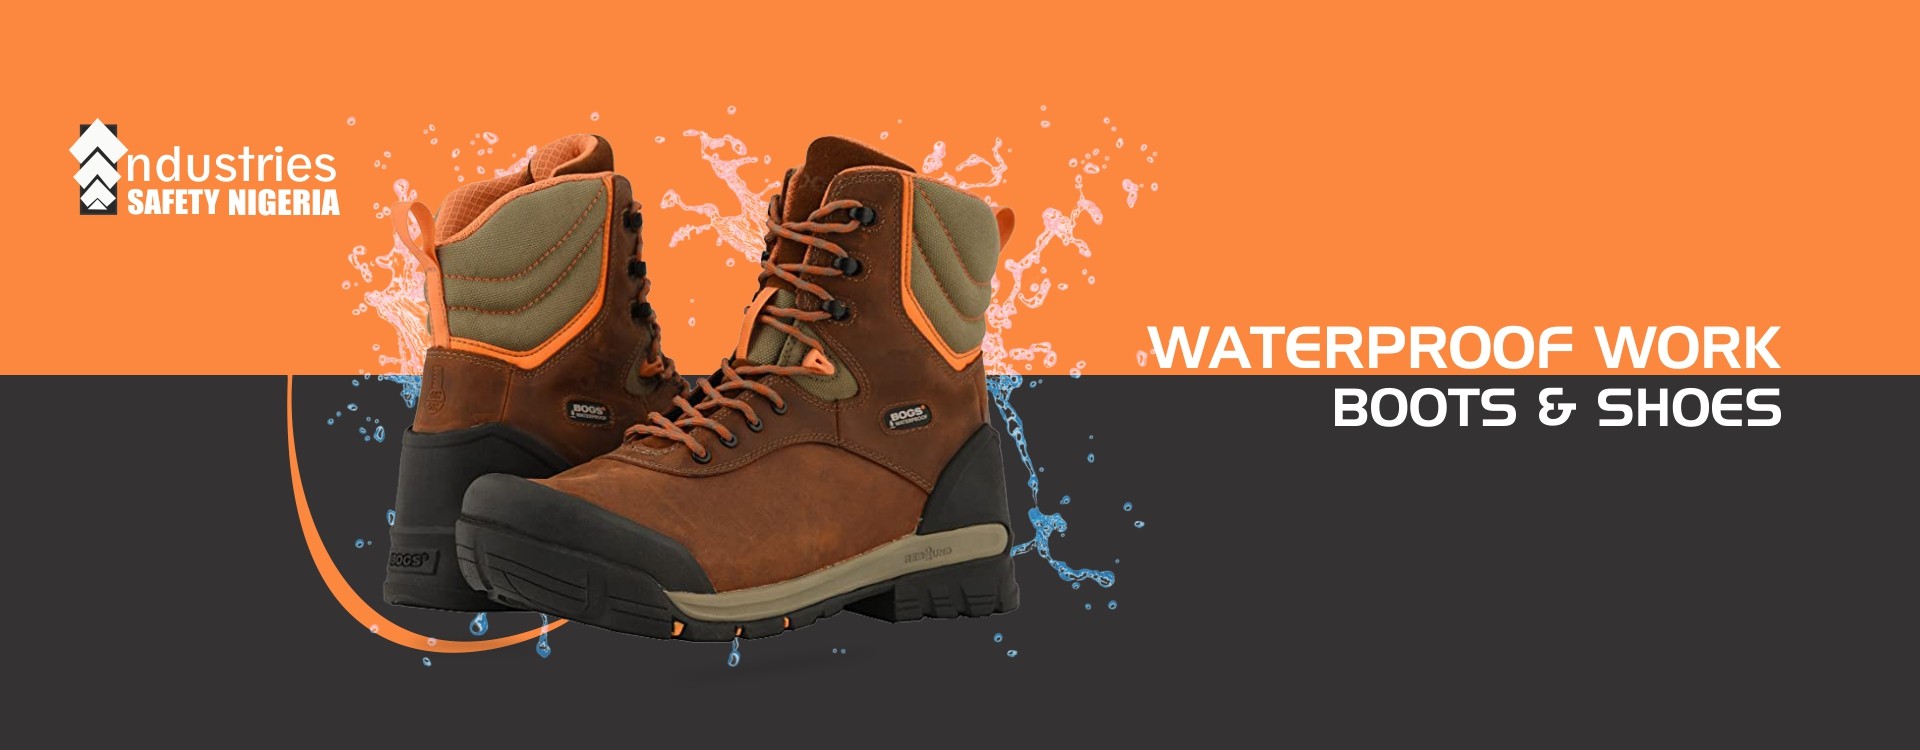 Waterproof Work Boots and Shoes - Water Resistance - Safety Blog